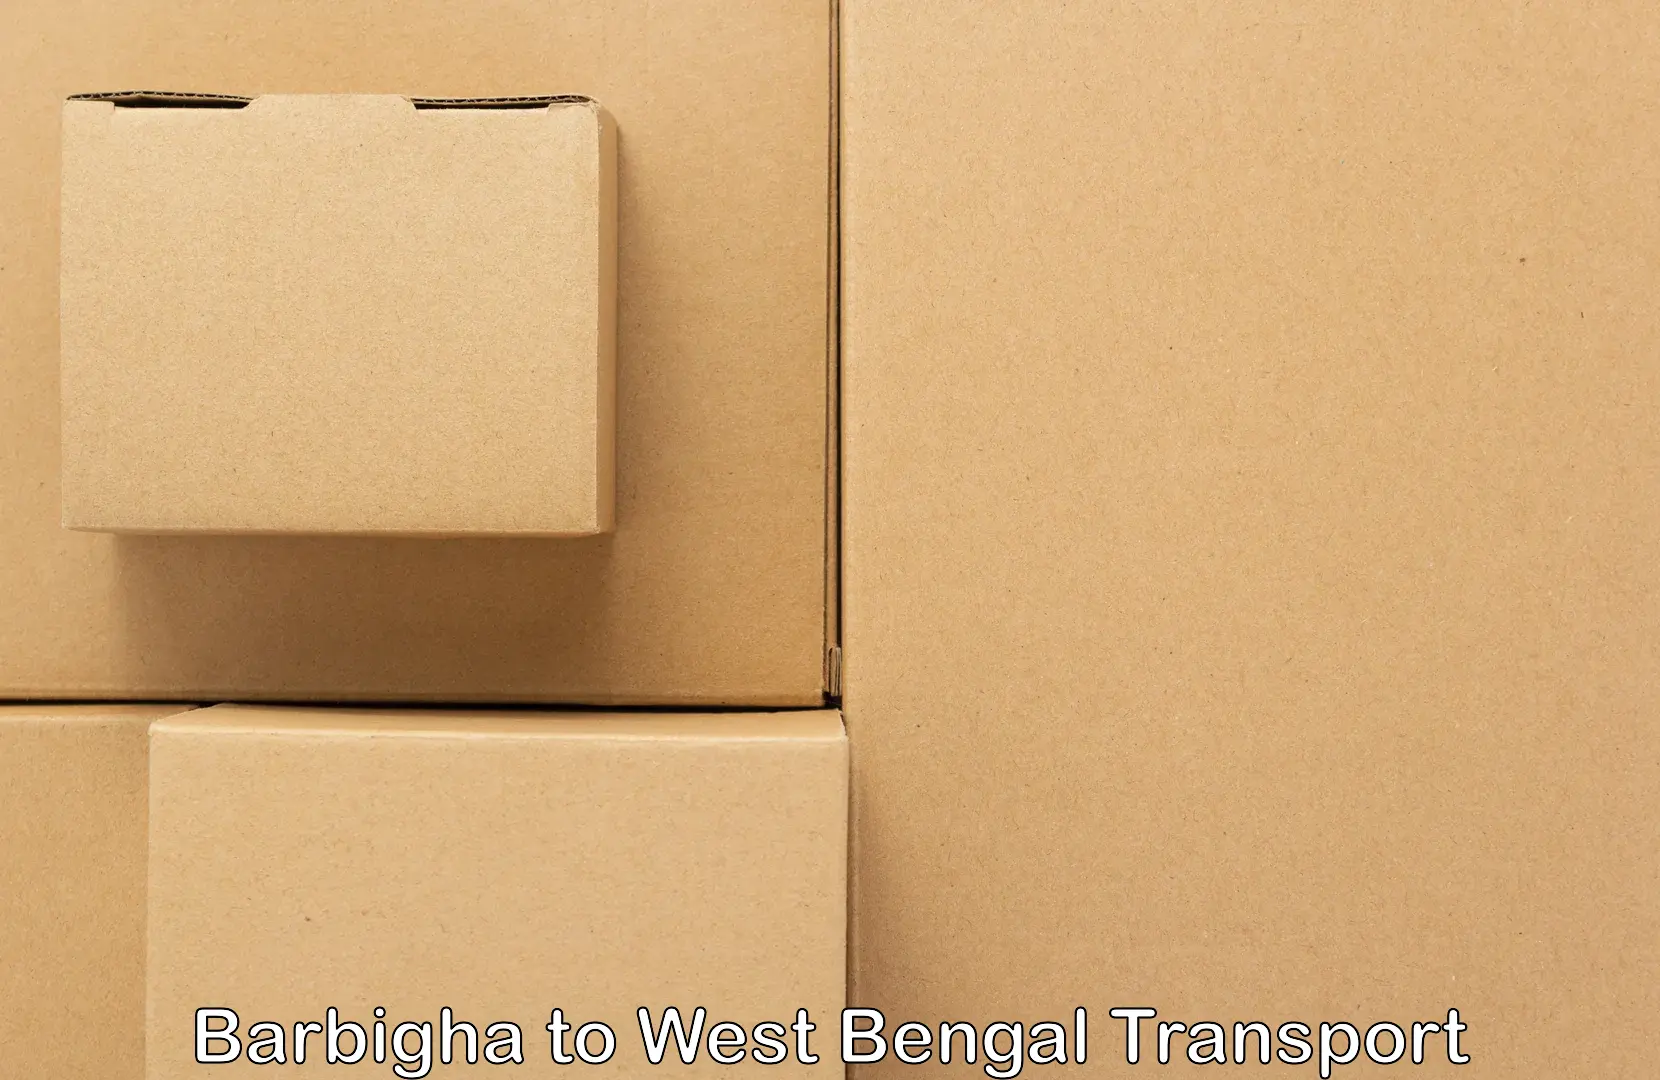 Truck transport companies in India Barbigha to West Bengal